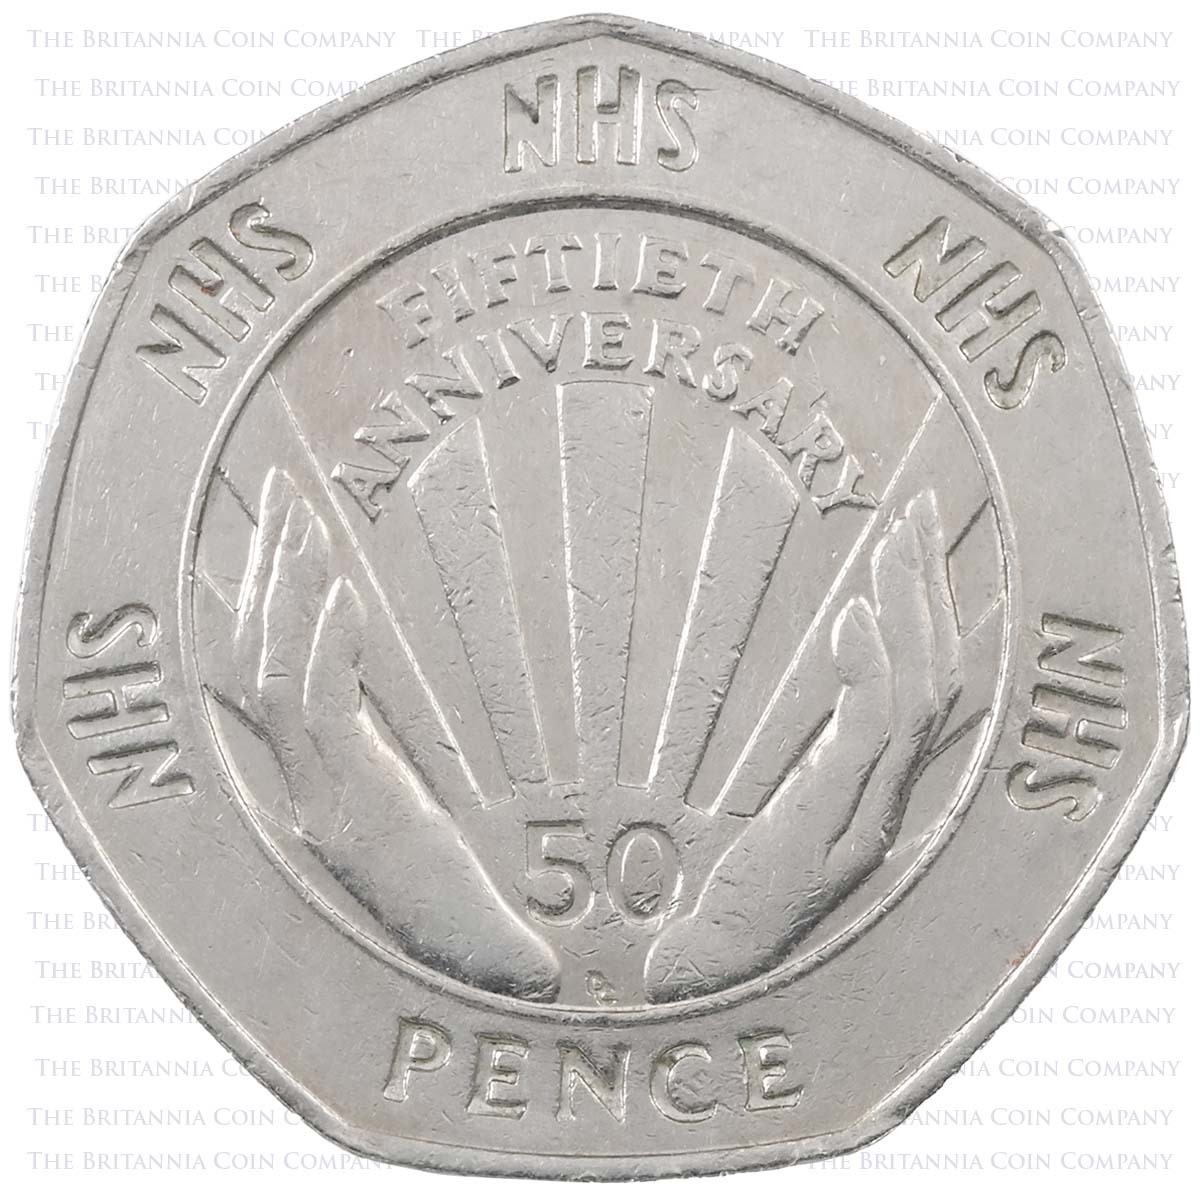 1998 National Health Service Circulated Fifty Pence Coin Reverse